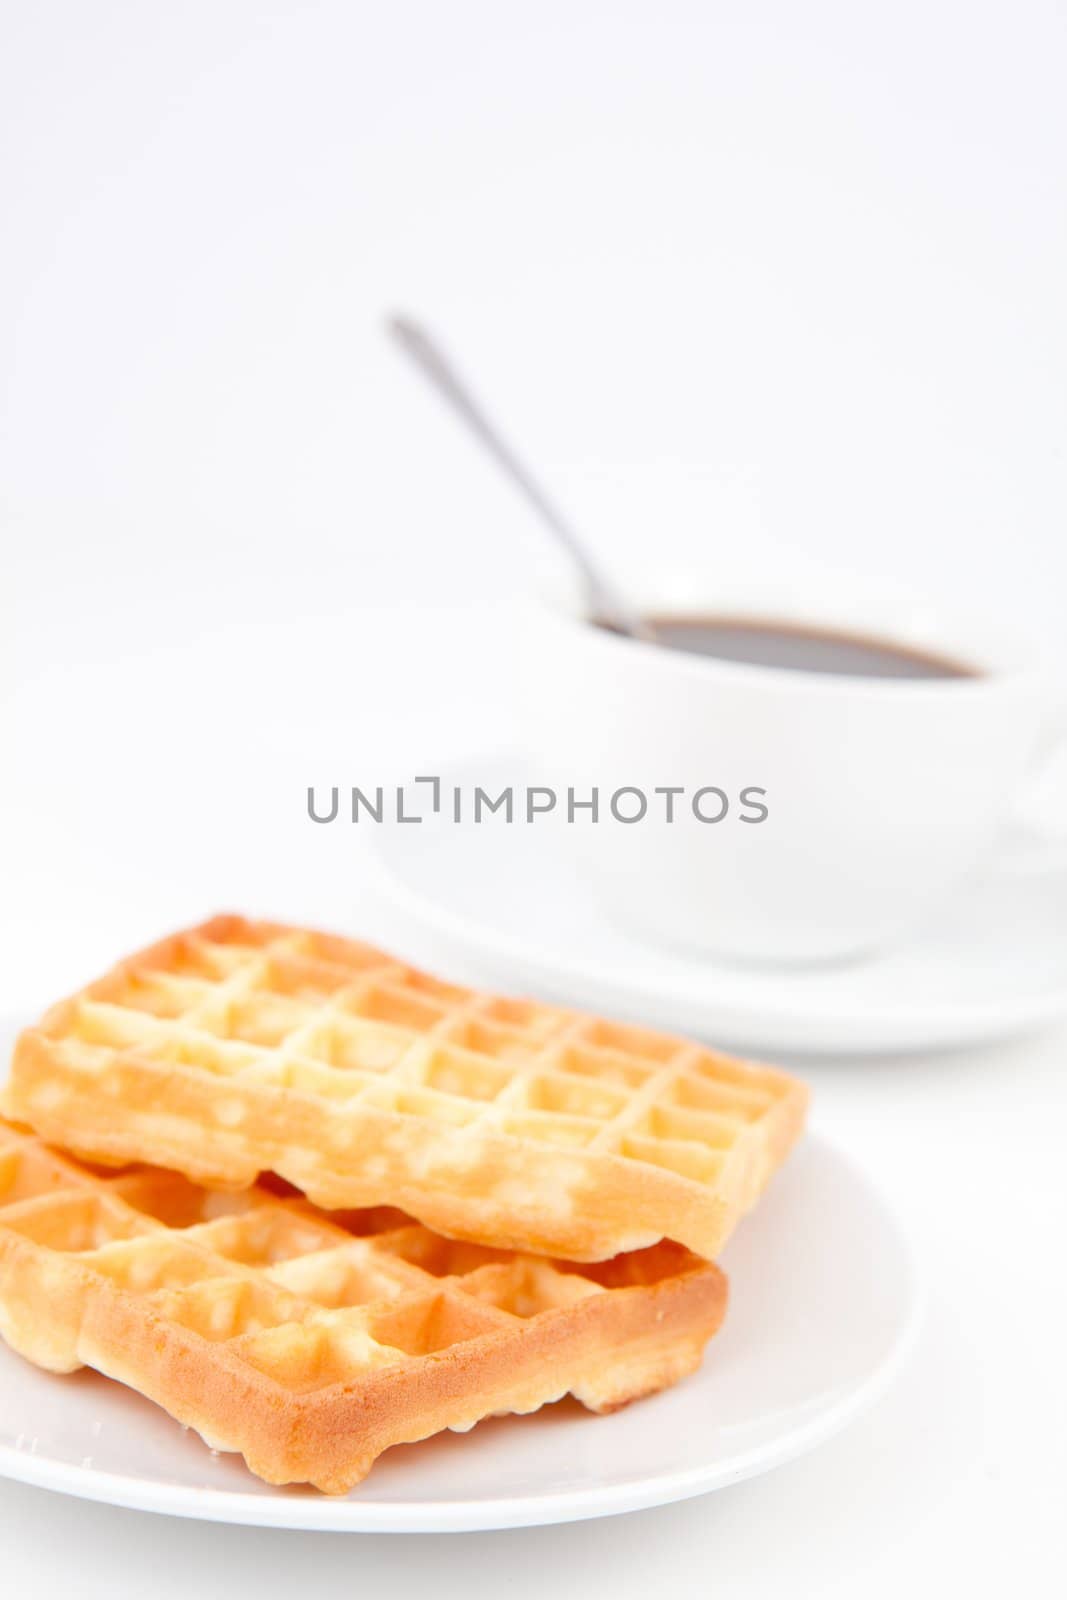 Waffles and a cup of coffee with a spoon on white plates by Wavebreakmedia